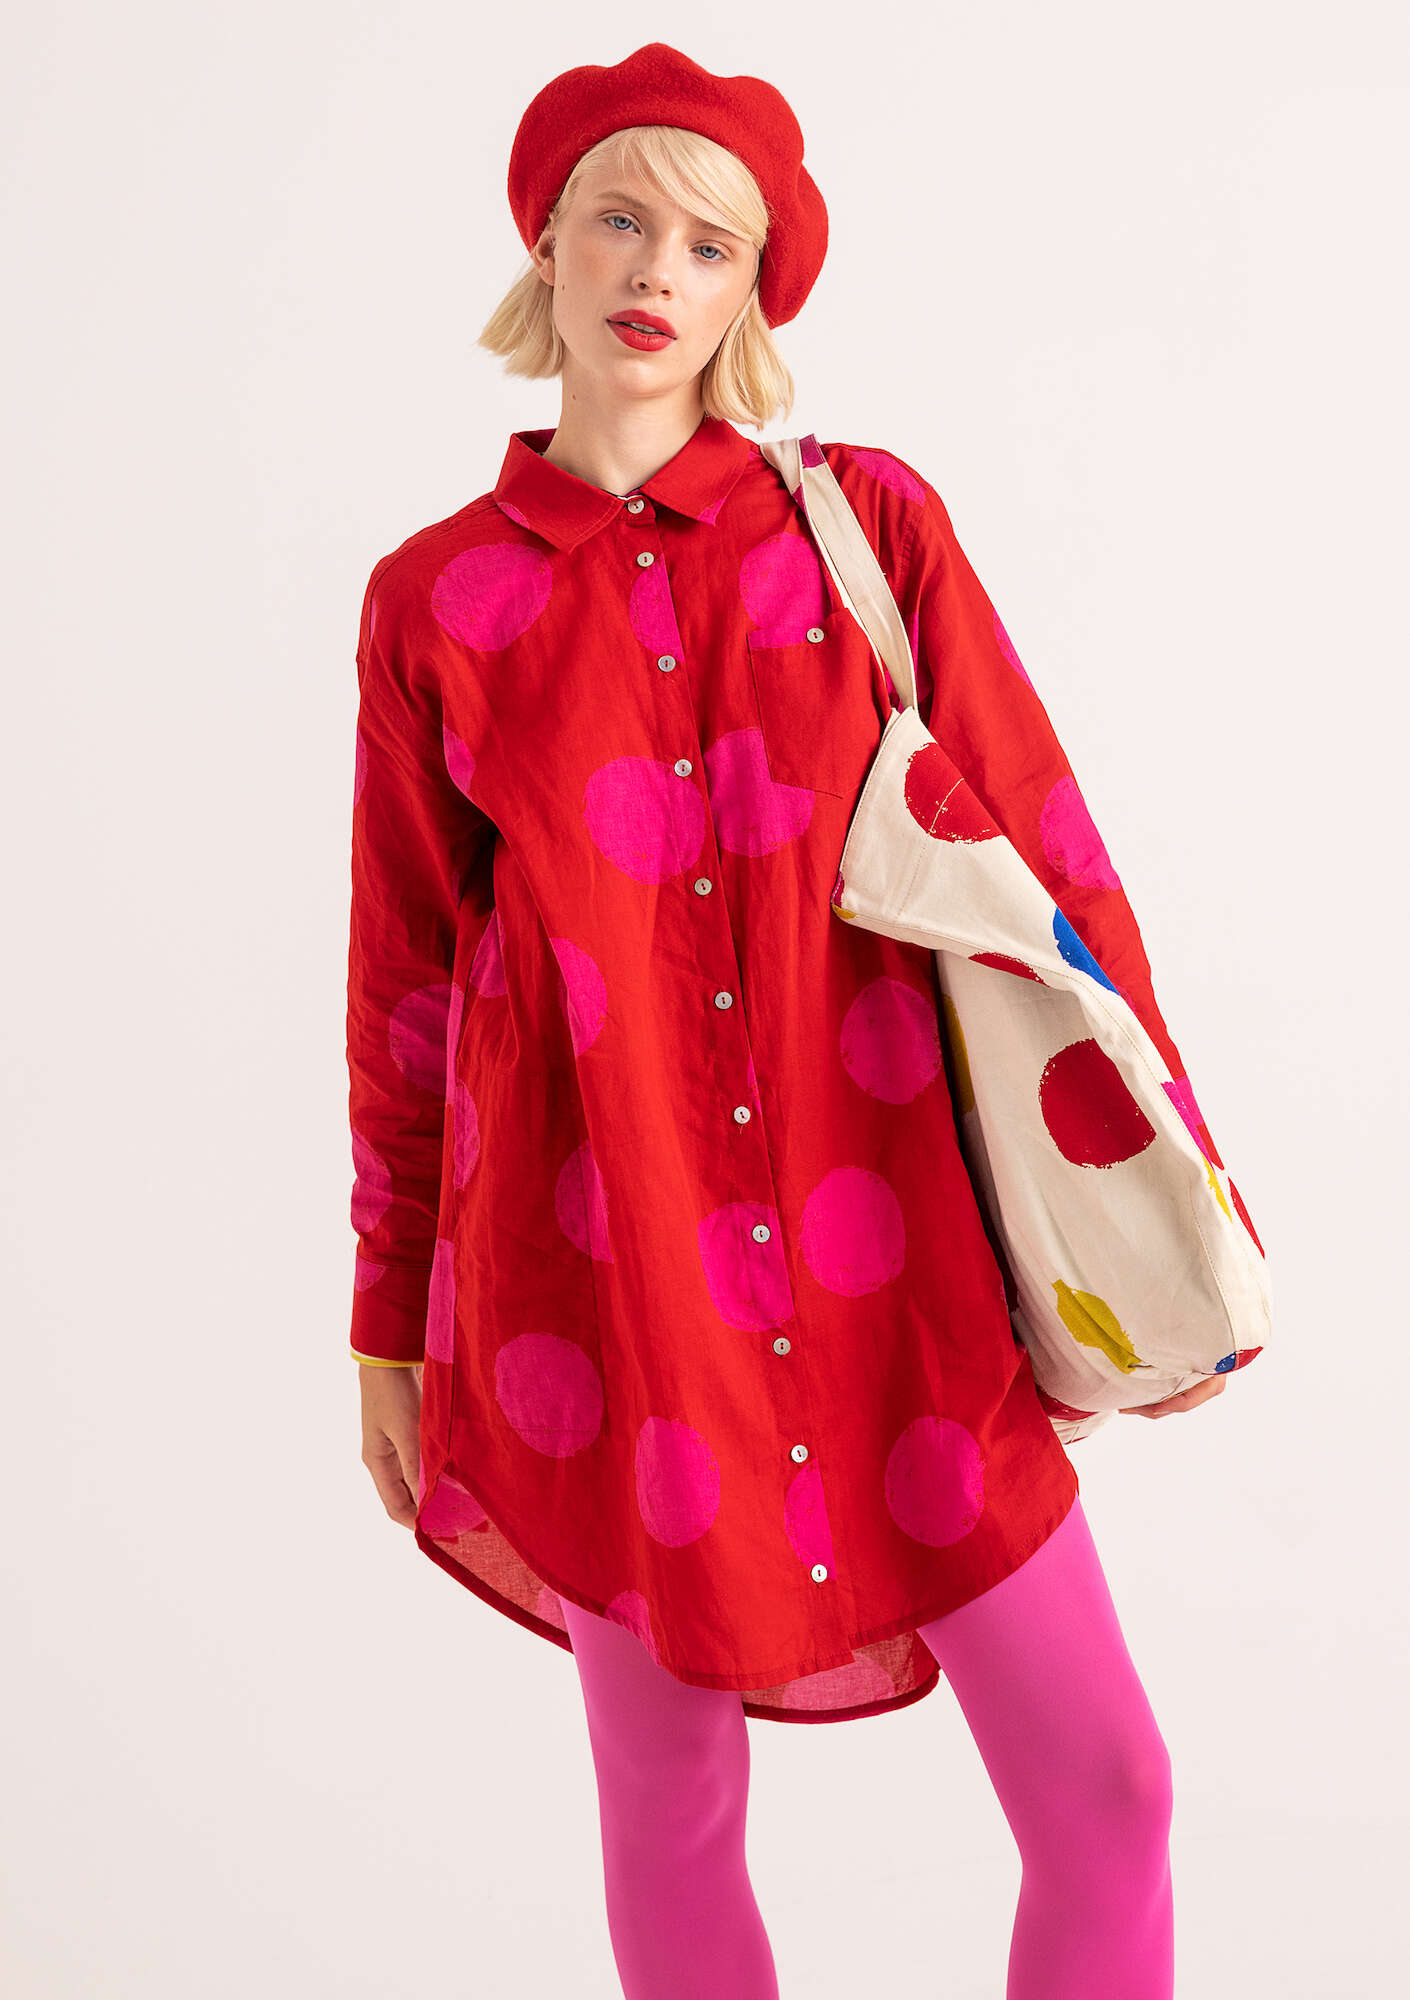 “Palette” shirt dress in organic cotton parrot red/patterned